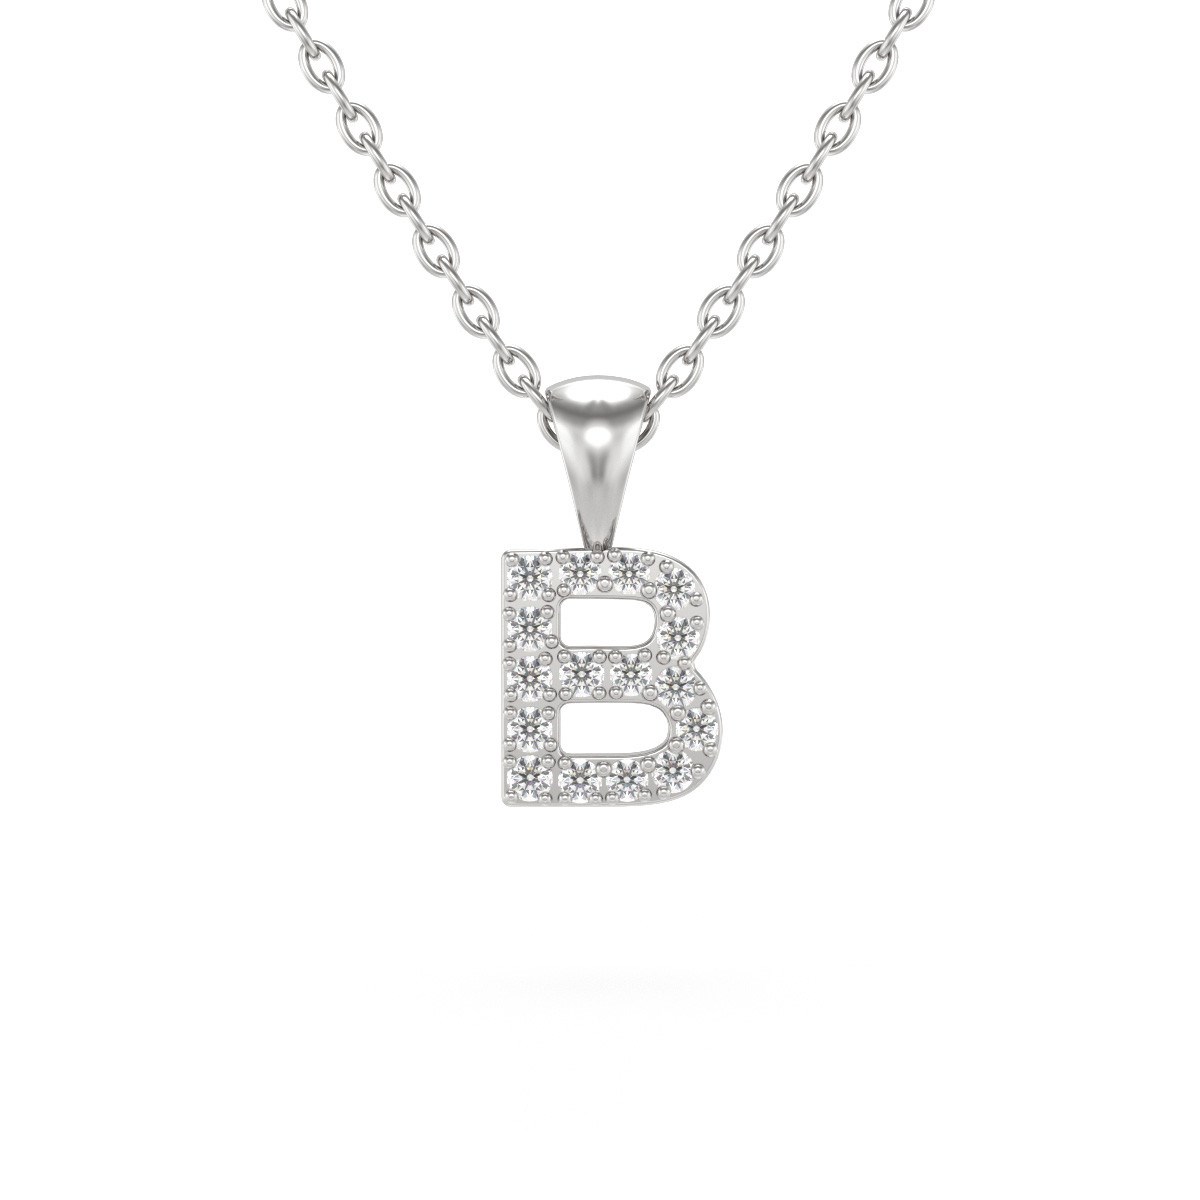 Collier Pendentif ADEN Lettre B Or 750 Blanc Diamant Chaine Or 750 incluse 0.72grs